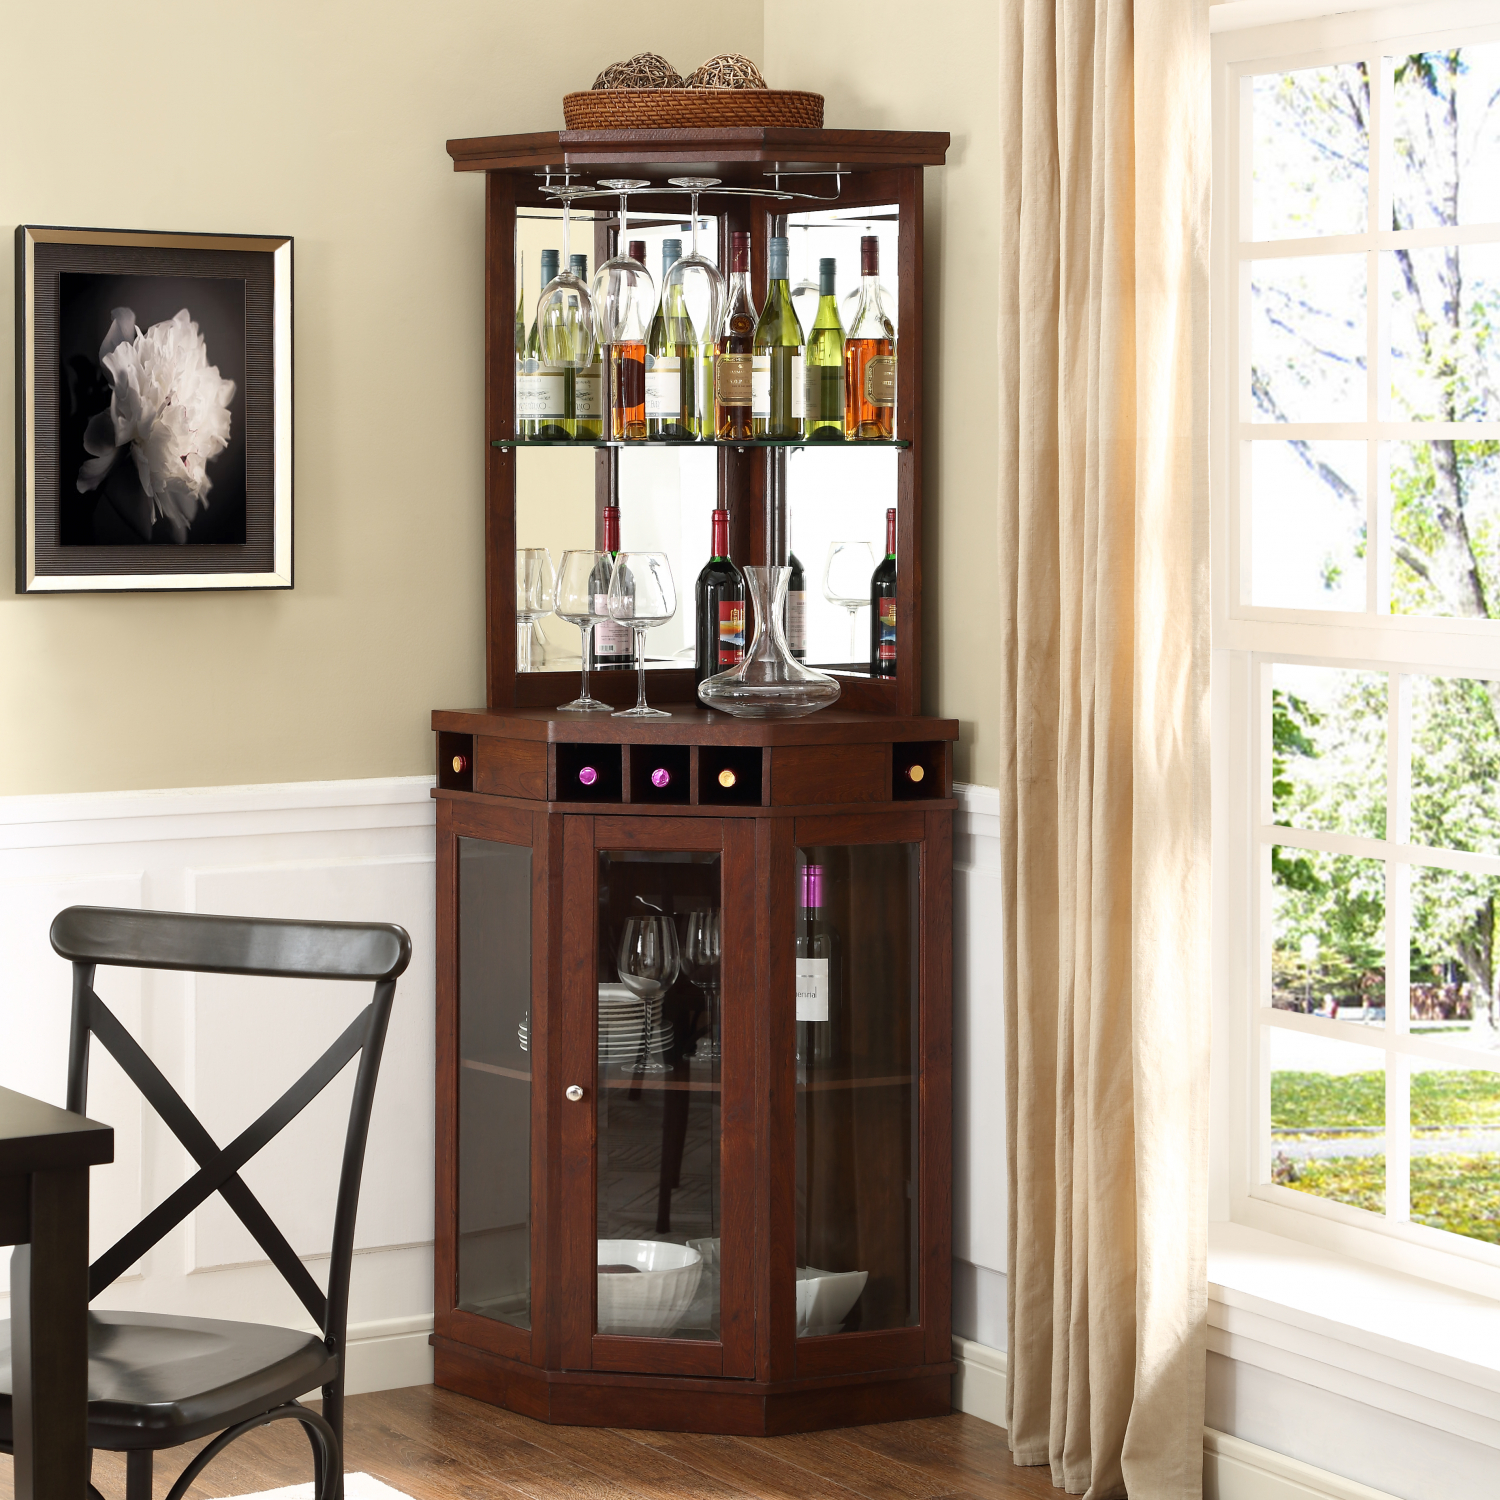 Details About Mini Bars Liquor Cabinet Whiskey Cabinets Wine Storage Wooden Home Bar Furniture with regard to dimensions 1500 X 1500